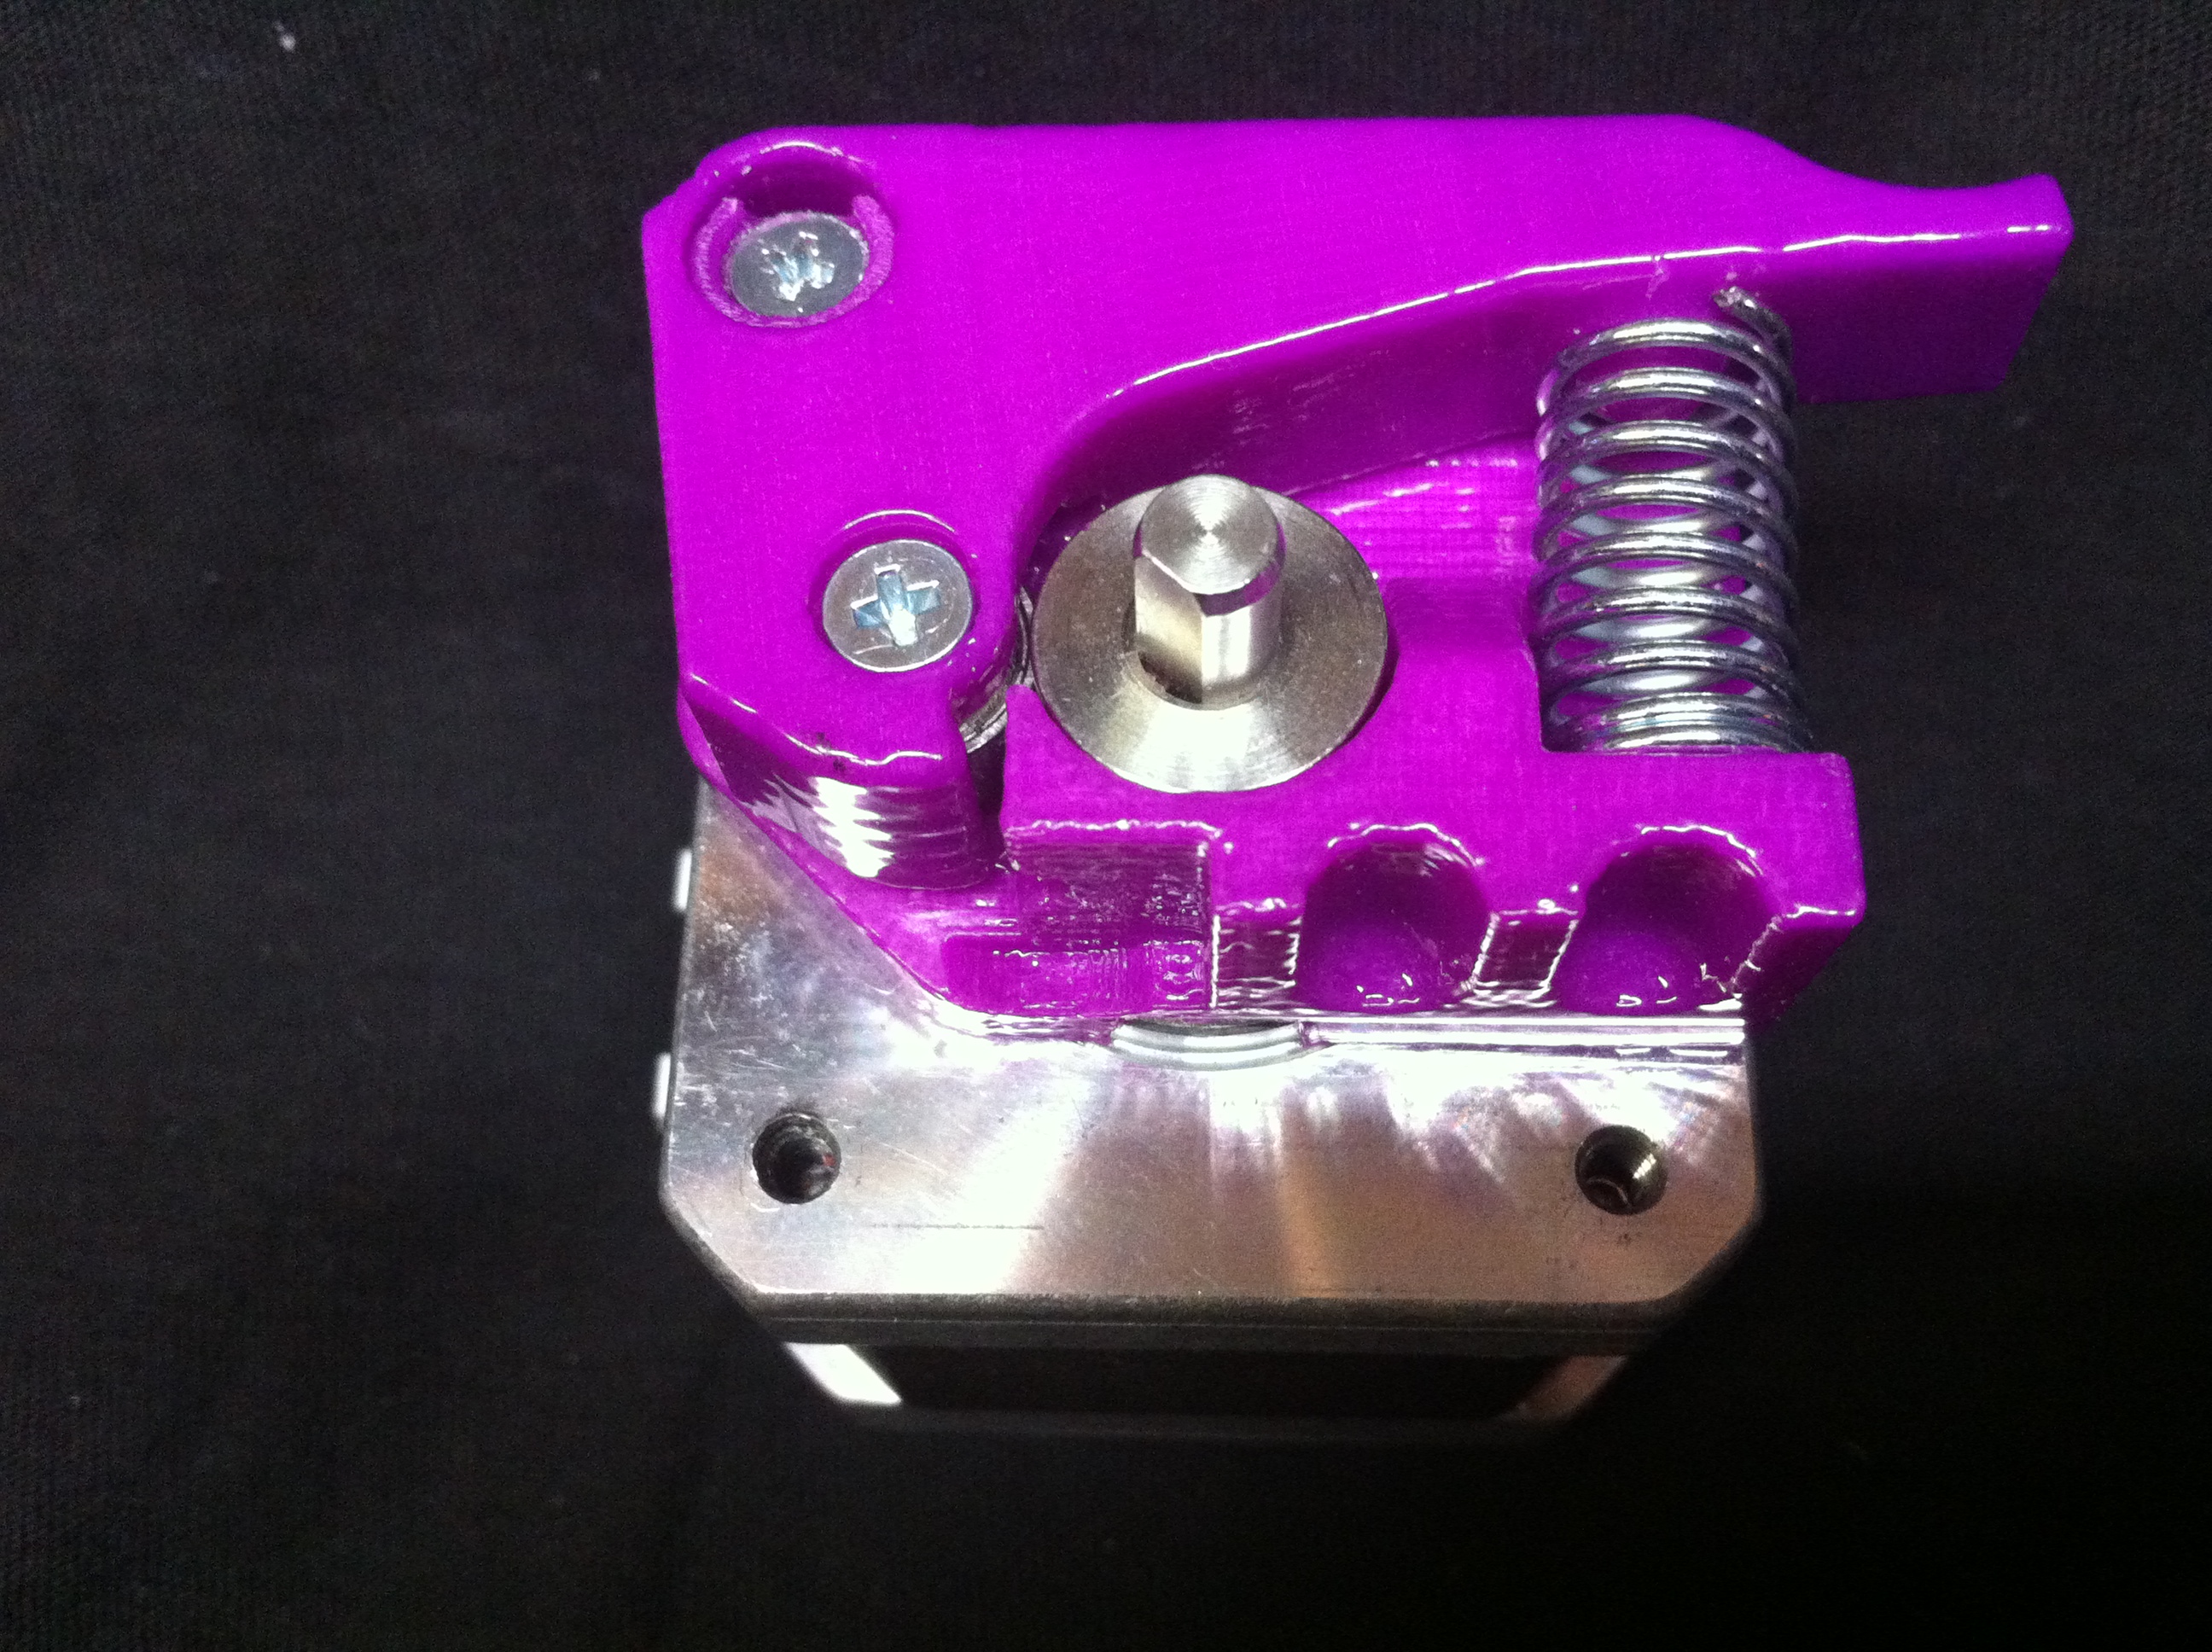 3D Printing – Rep2 Plunger Extruder Upgrade 2